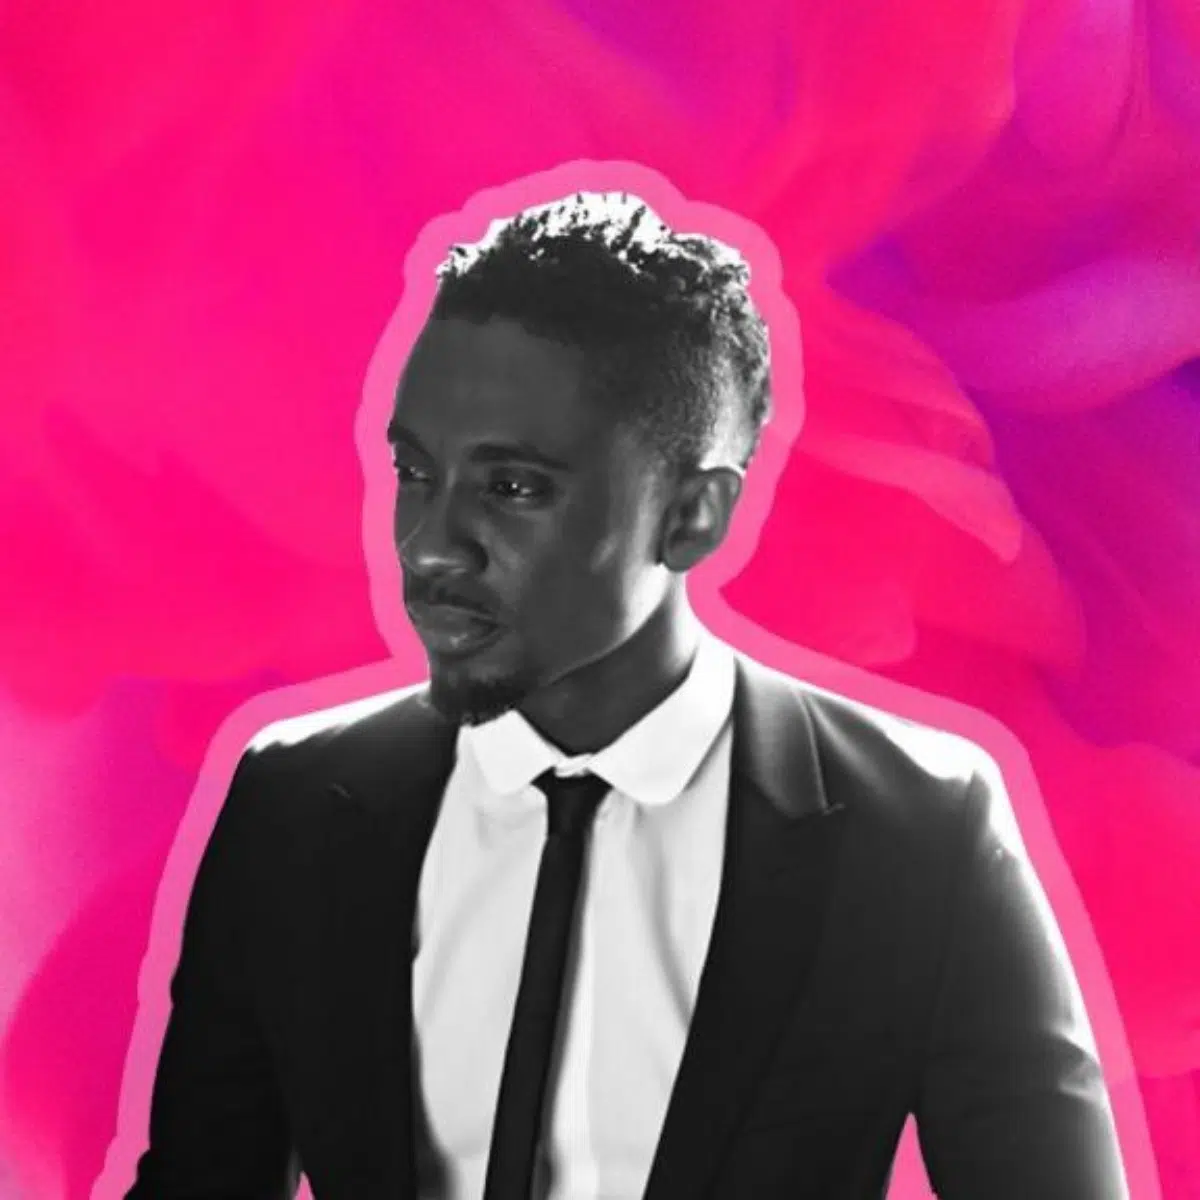 DOWNLOAD: Christopher Martin – “You’ll Never Find” Video + Audio Mp3